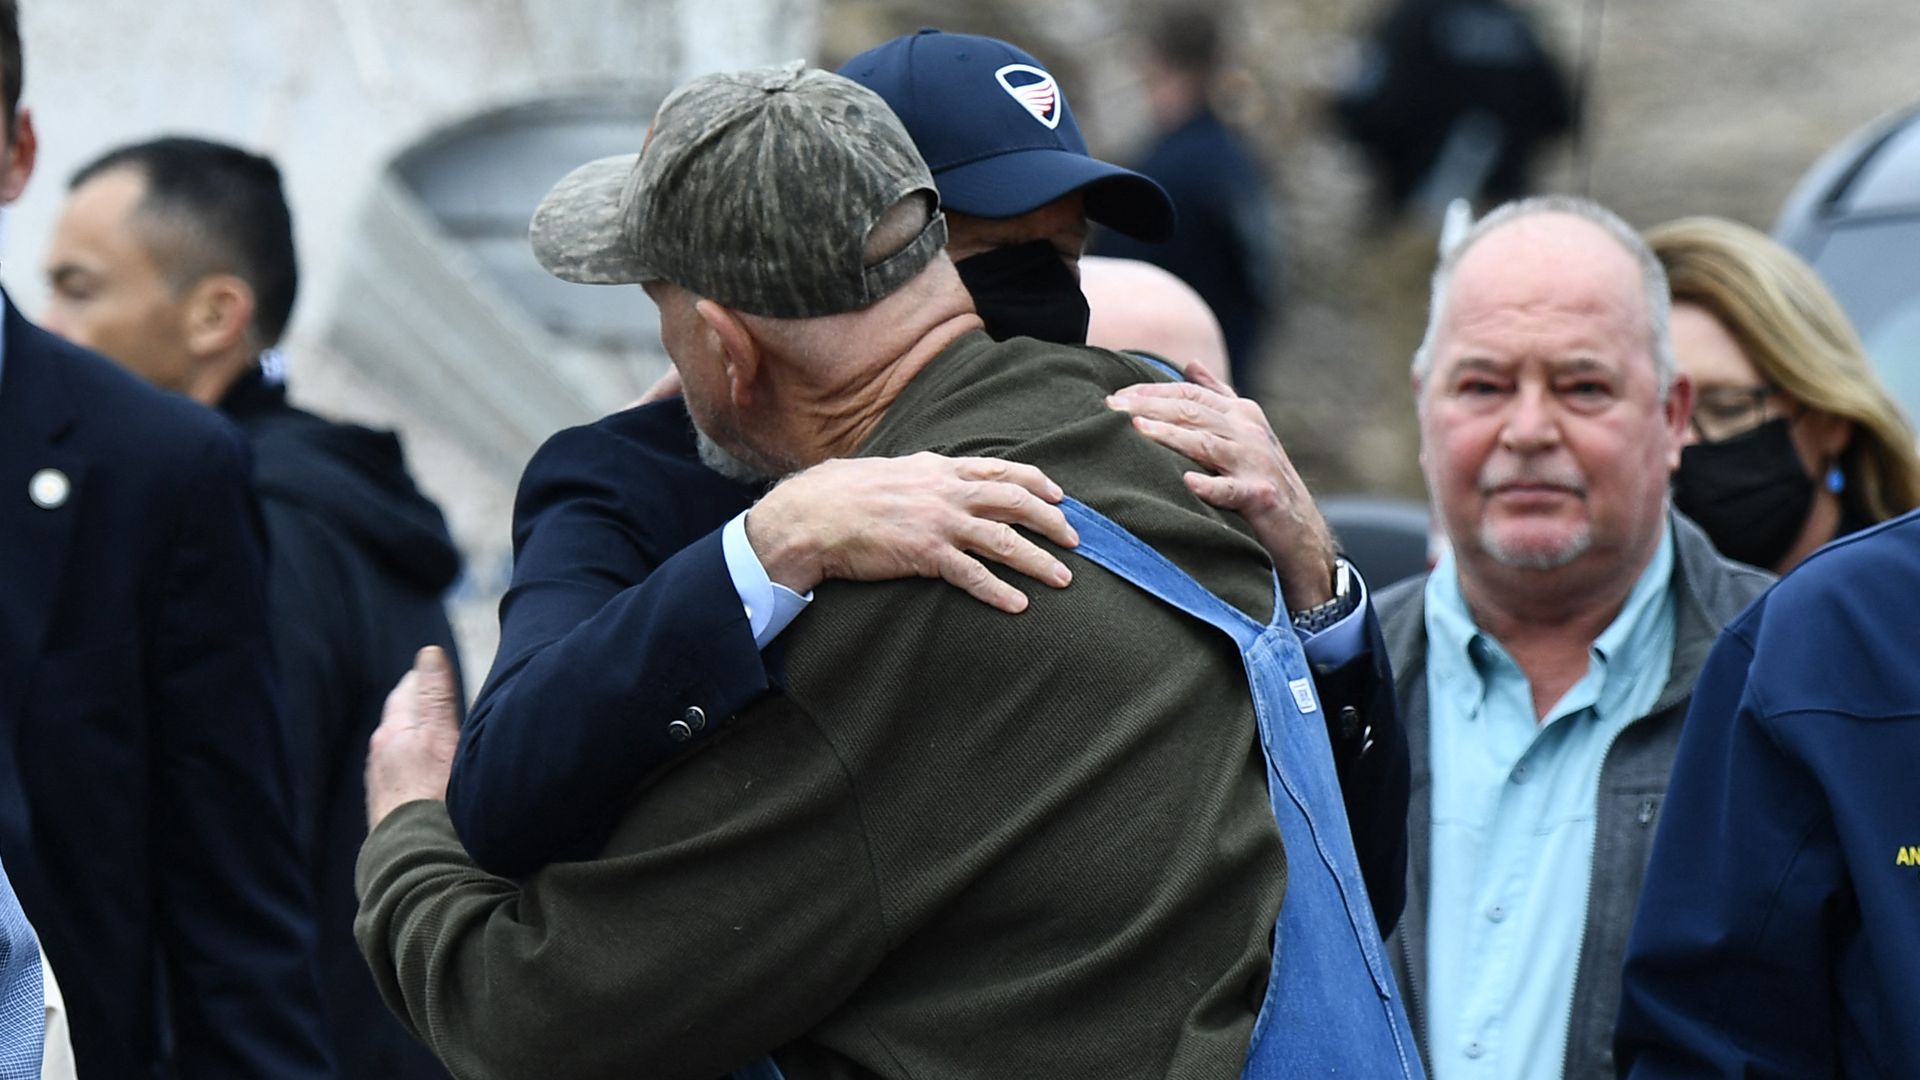 President Biden is seen hugging a resident of Mayfield, Ky., after touring tornado damage in the area.